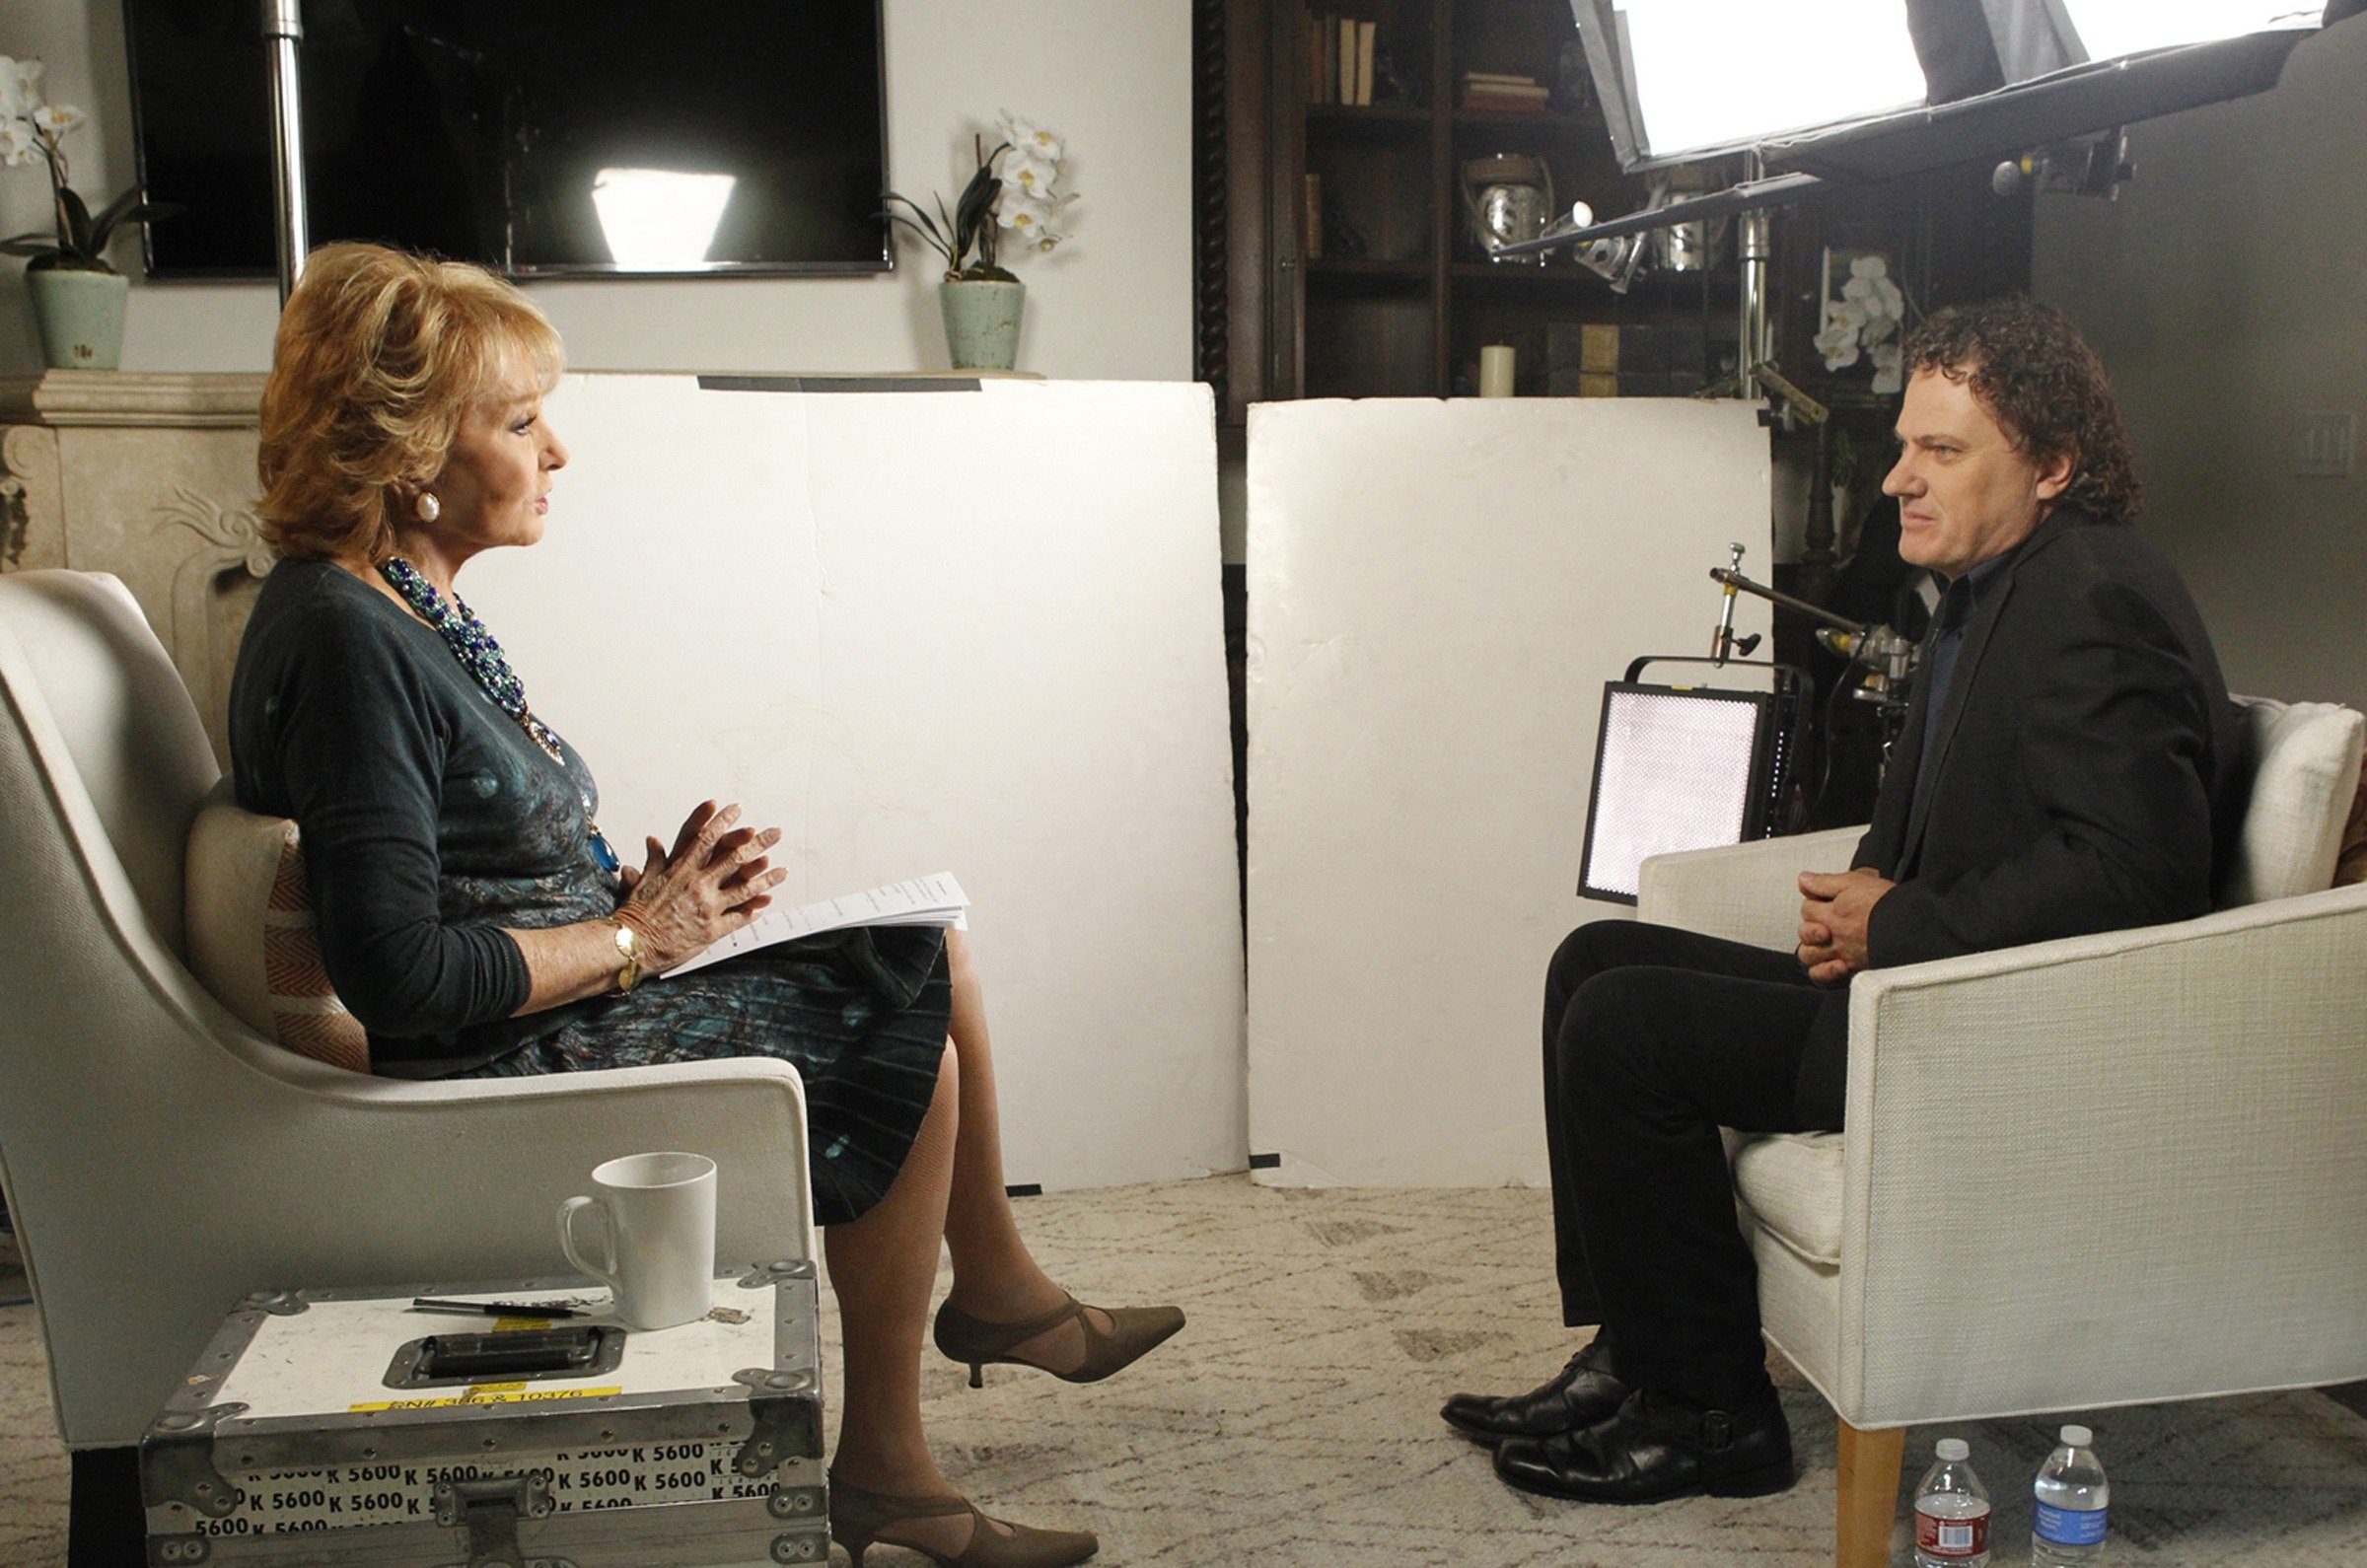 Barbara Walters is shown interviewing Peter Rodger, the father of Isla Vista shooter Elliot Rodger in Los Angeles